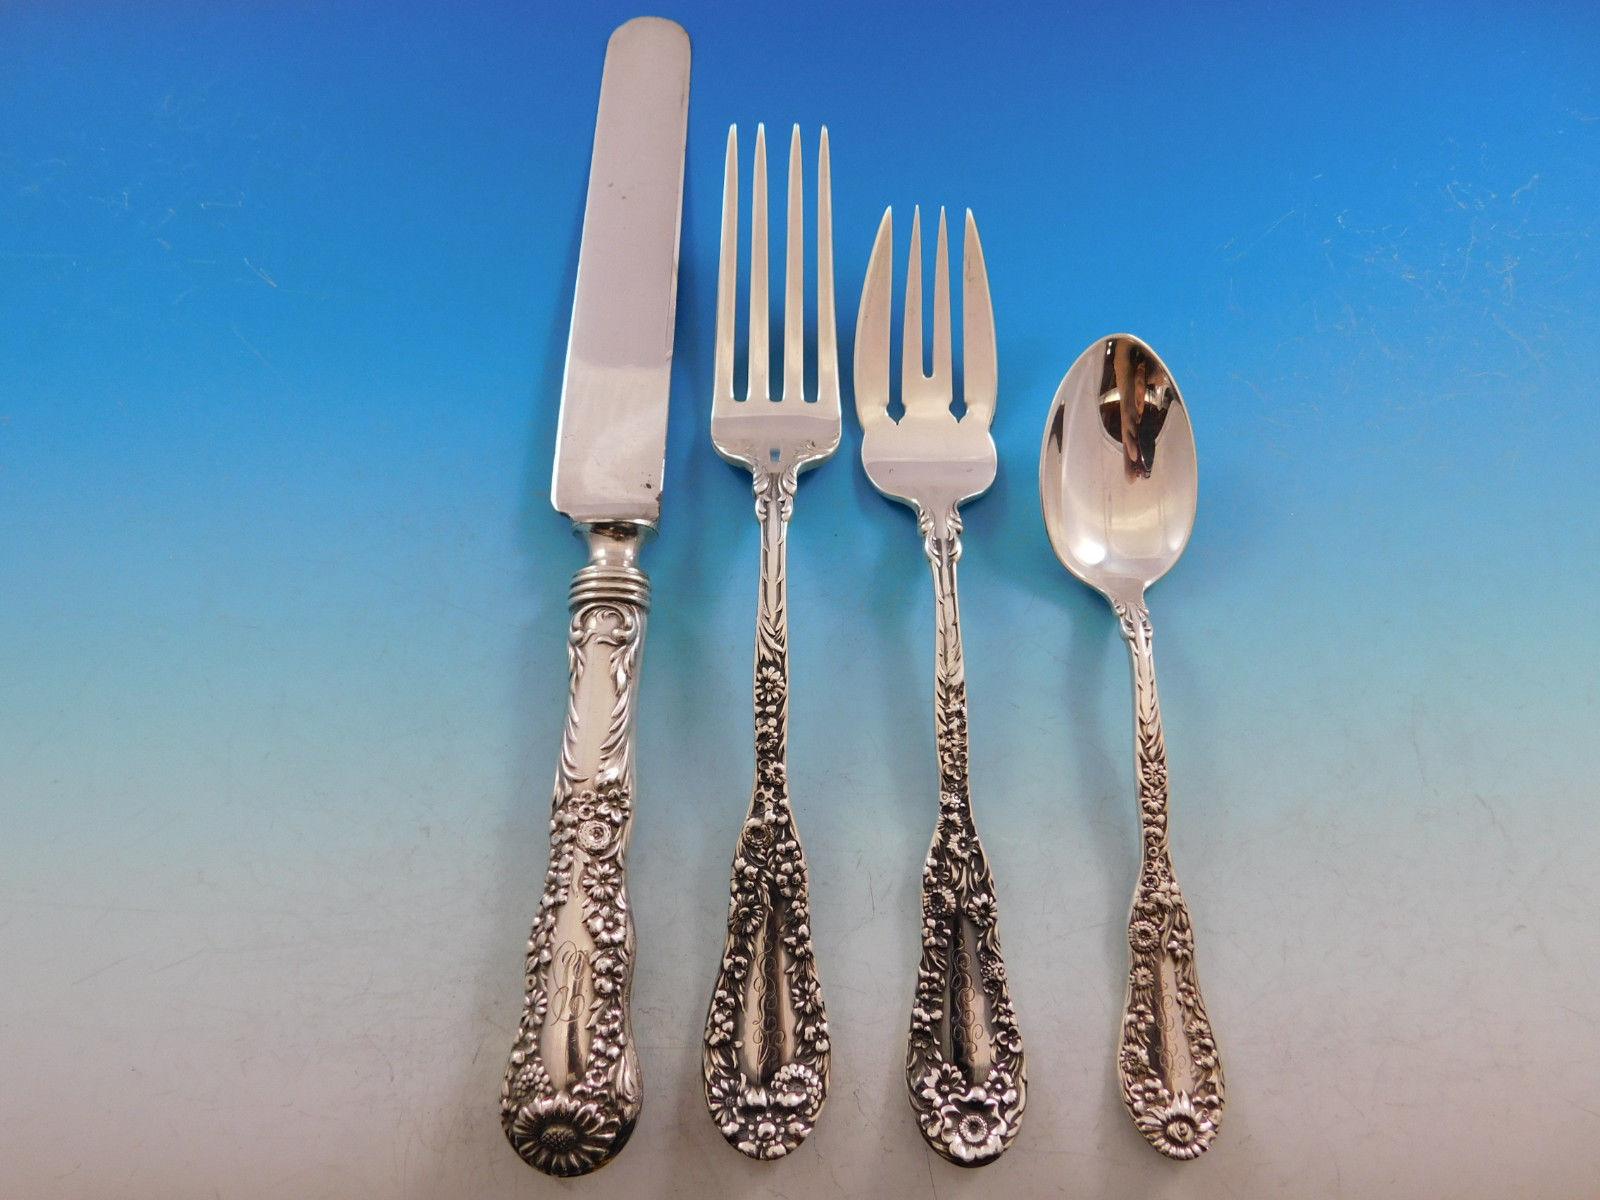 Number 10 by Dominick Haff Sterling Silver Flatware Set Service 159 Pcs Dinner In Excellent Condition For Sale In Big Bend, WI